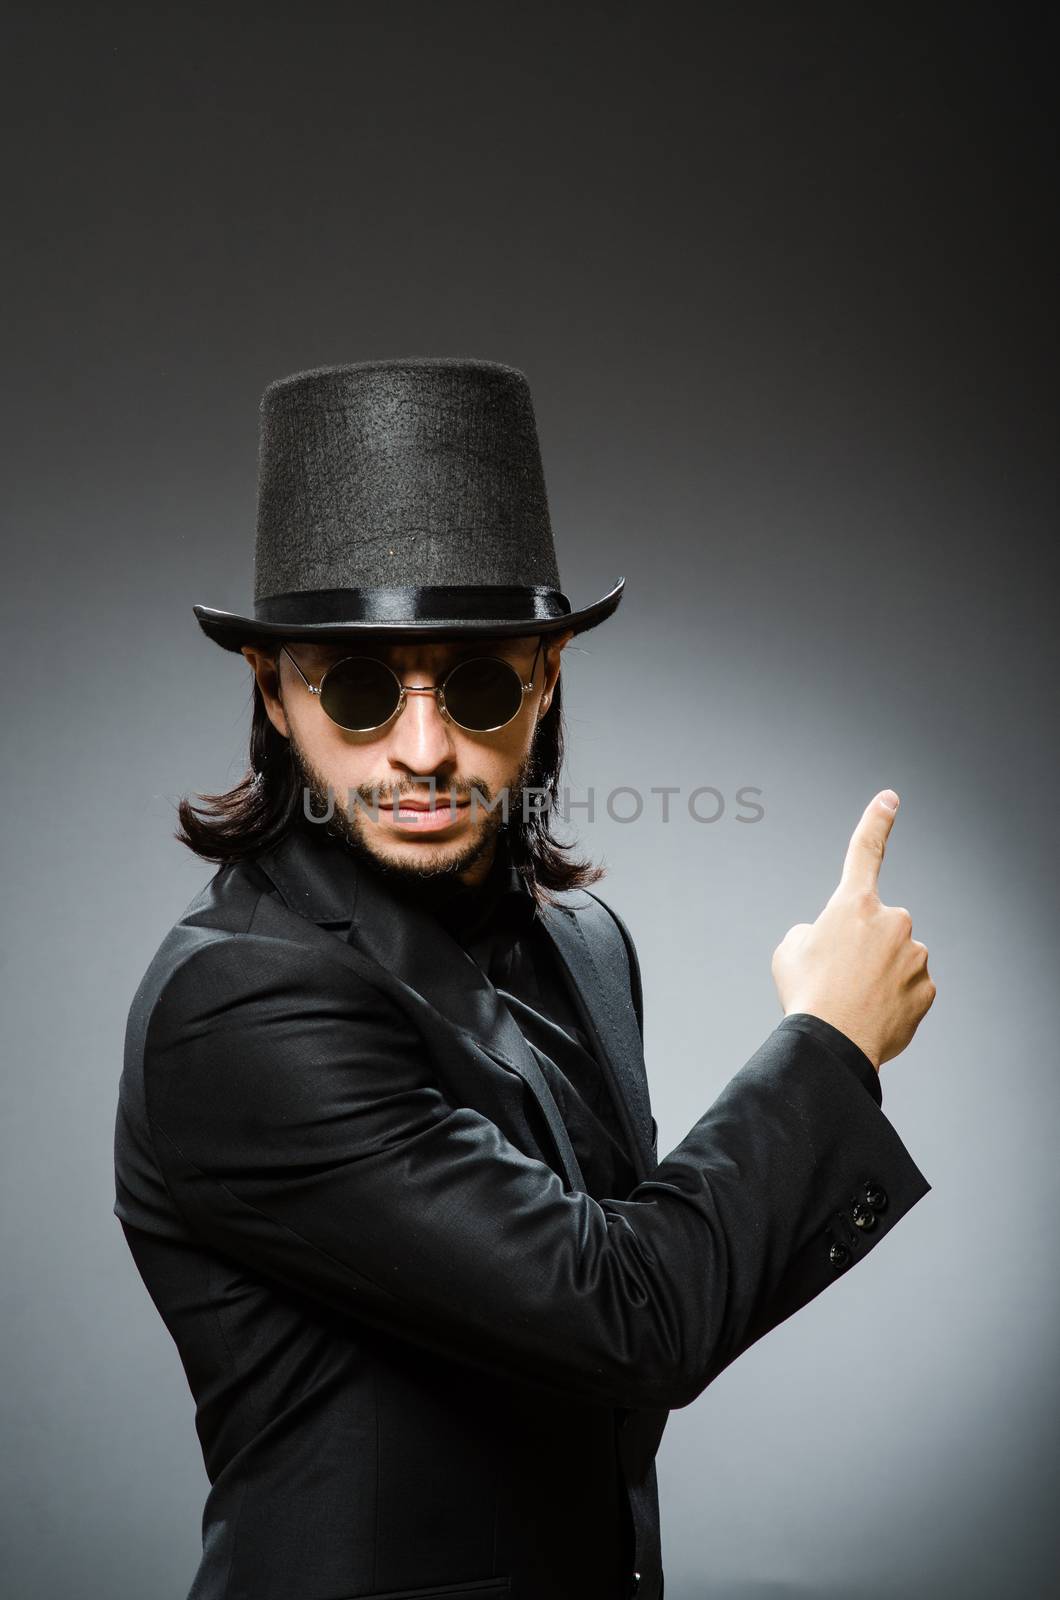 Vintage concept with man wearing black top hat by Elnur